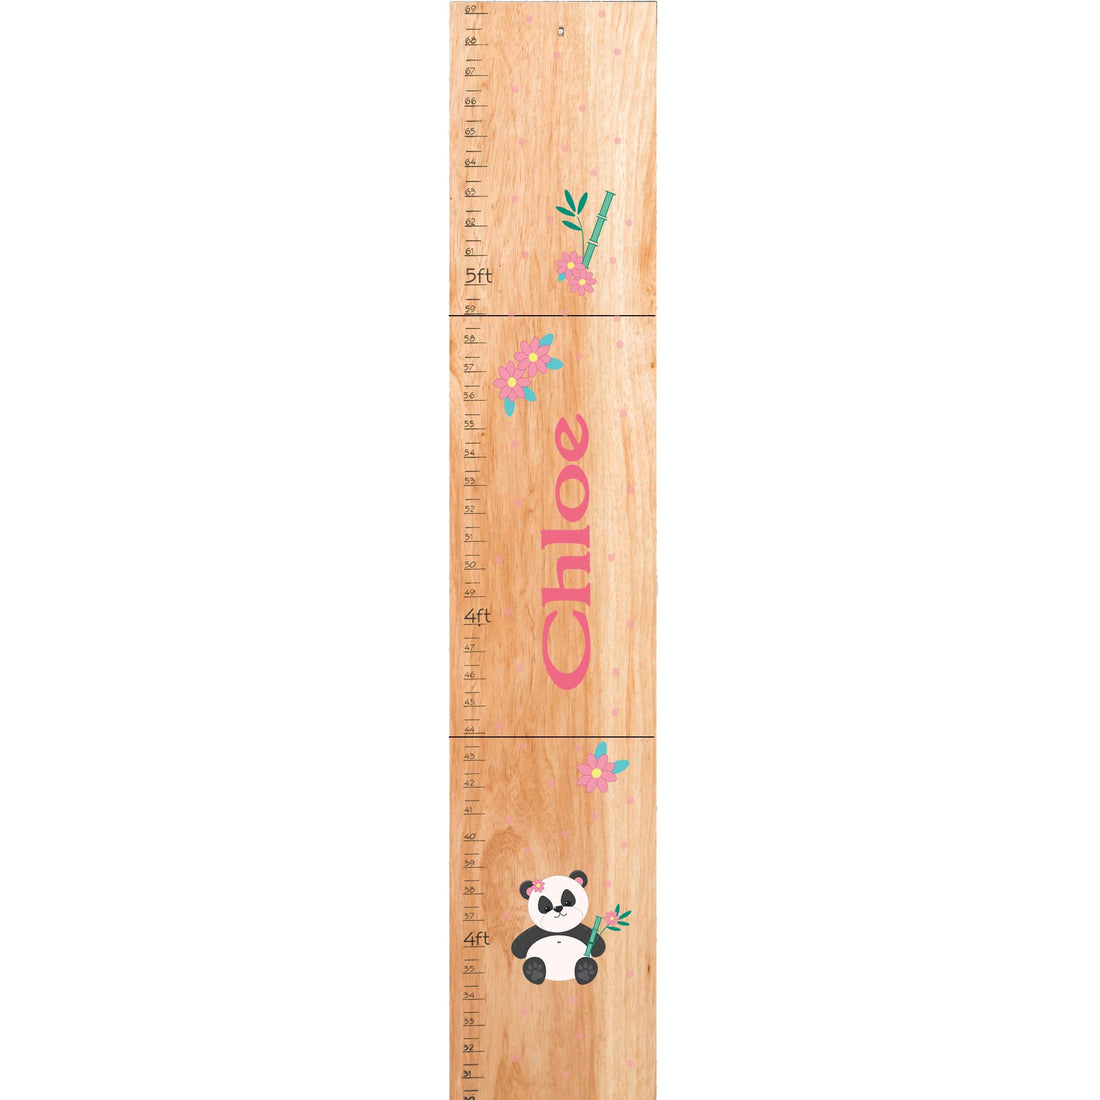 Personalized Natural Wooden Growth Chart with Panda Bear design